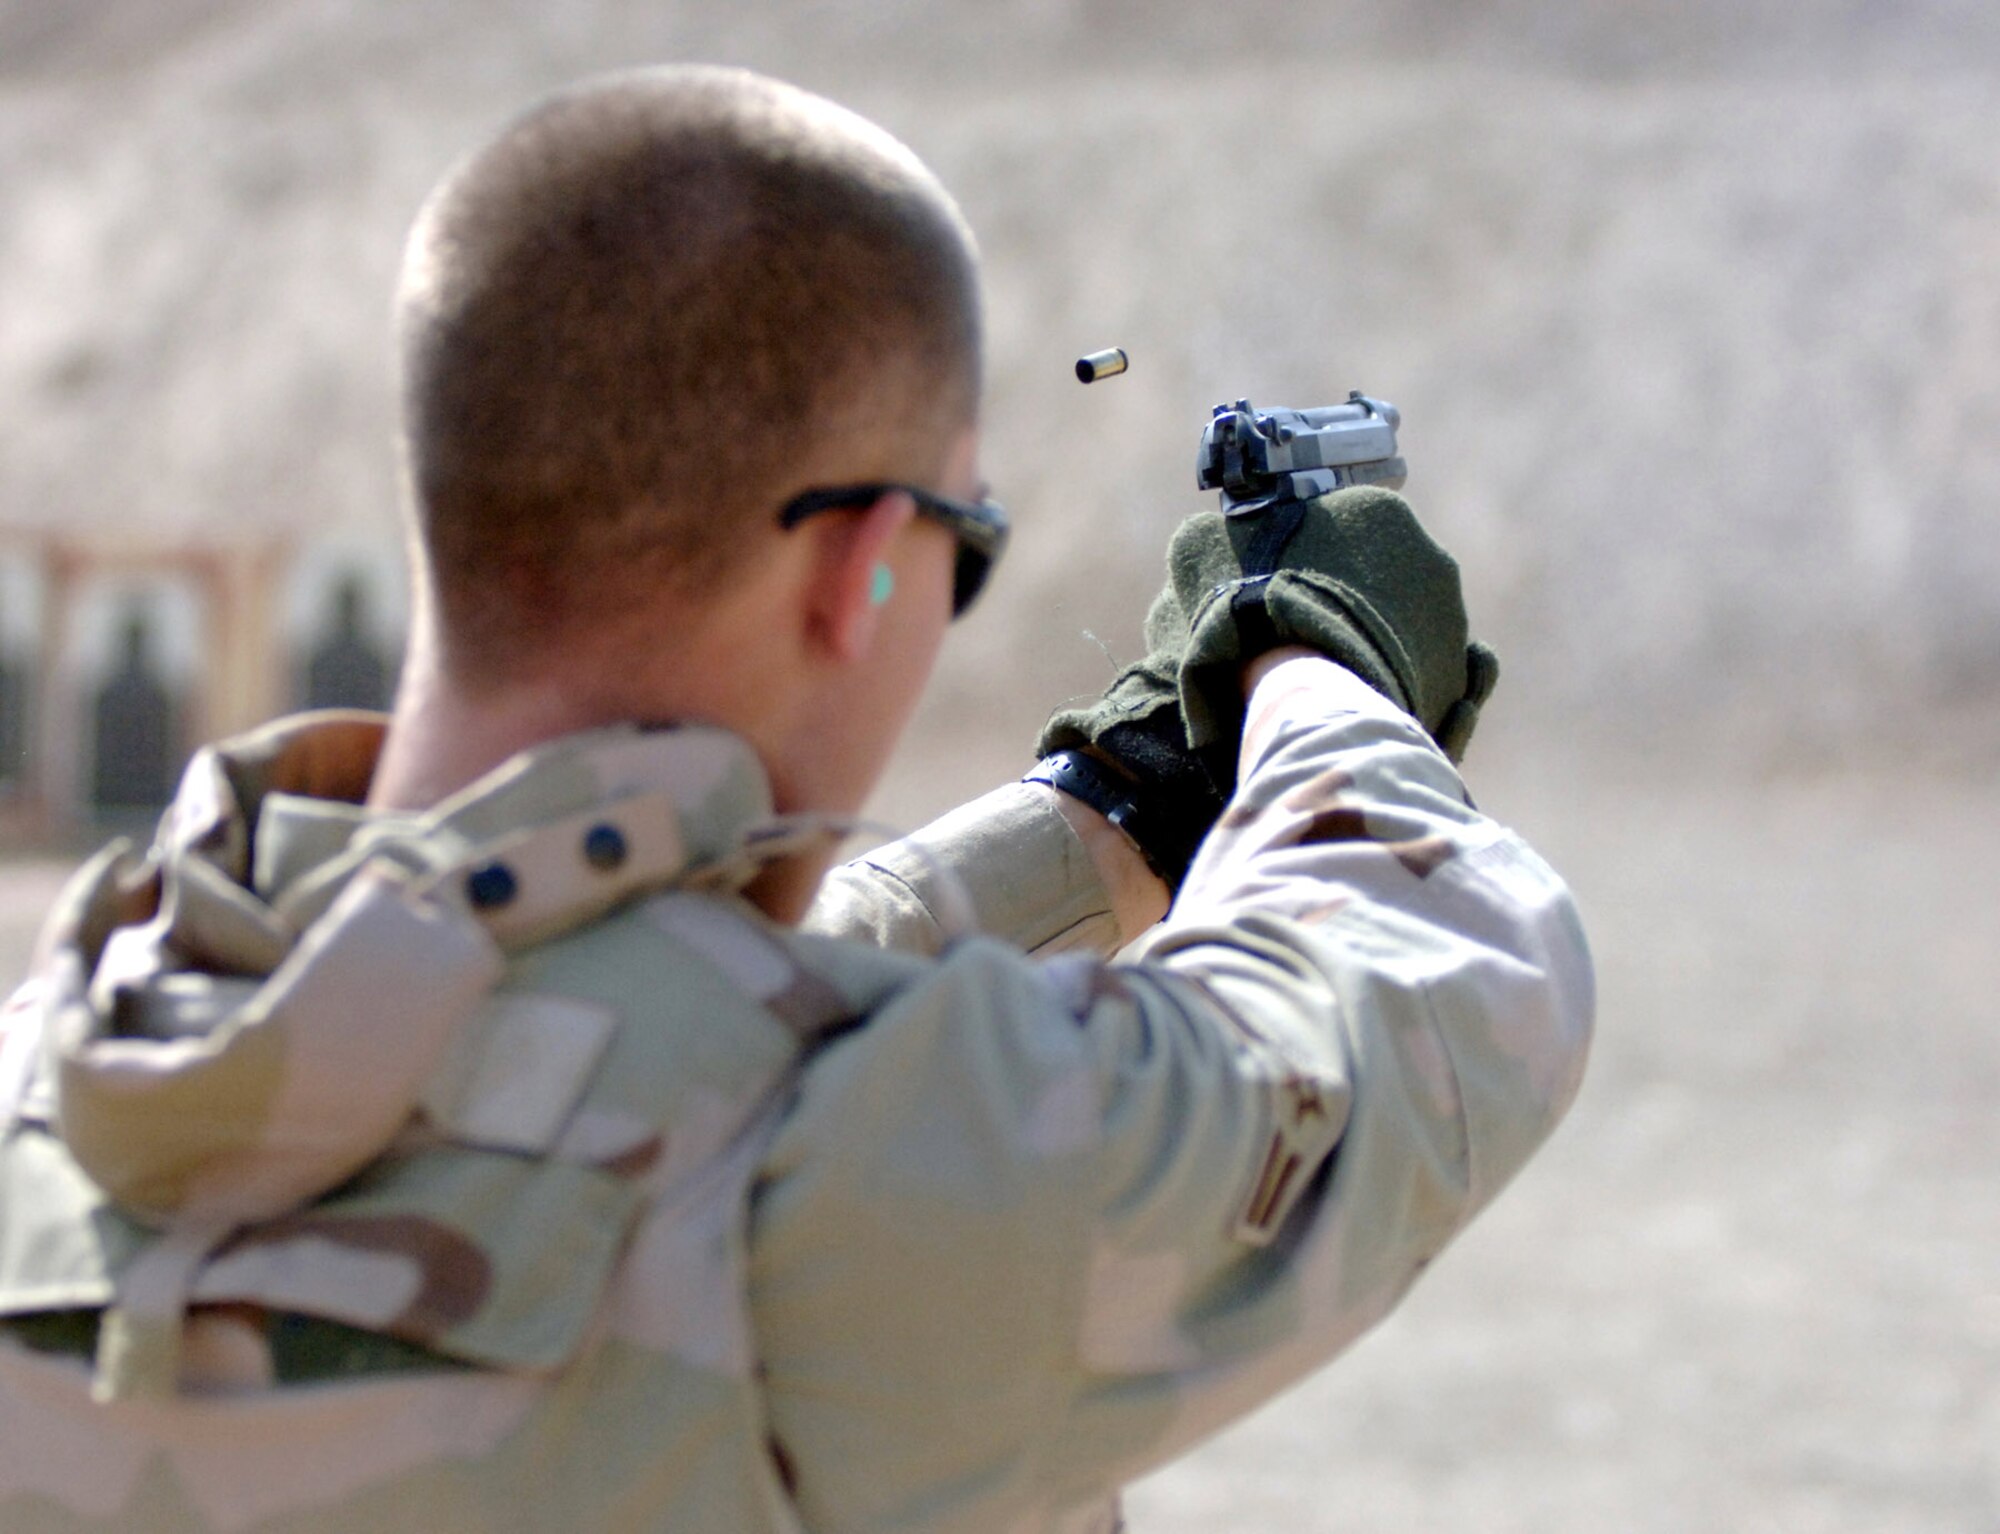 Airman 1st Class Brandon Newton fires an M-9 Beretta at a match at Victory Base Complex, Iraq, on Monday, July 3. Nine teams from Sather Air Base and Iraqi New Al Muthana Air Base competed, testing their endurance, skill and marksmanship. The four-person teams were made up of deployed Airmen from various career fields. Airman Newton is assigned to the 447th Air Expeditionary Group, and is deployed from the 96th Services Squadron at Eglin Air Force Base, Fla. (U.S. Air Force photo/Staff Sgt. Bryan Bouchard) 